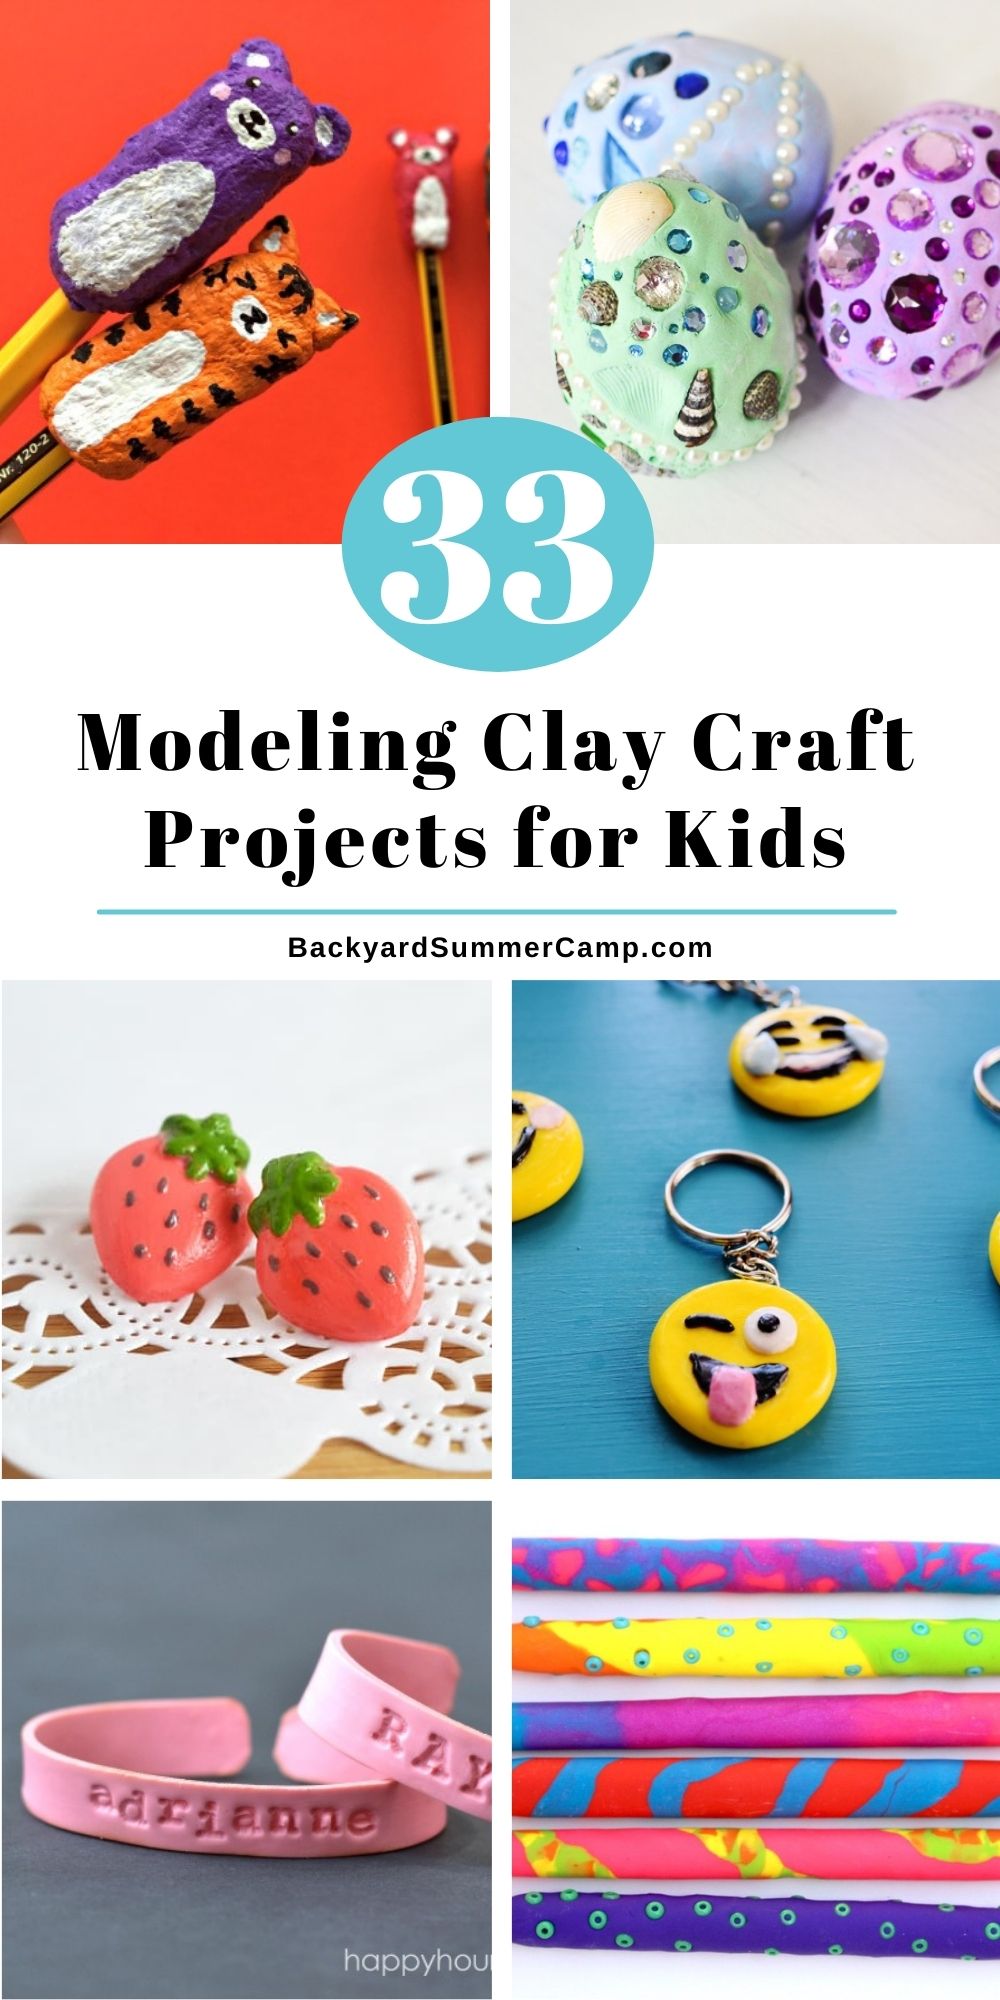 33 Modeling Clay Craft Projects for Kids - Backyard Summer Camp